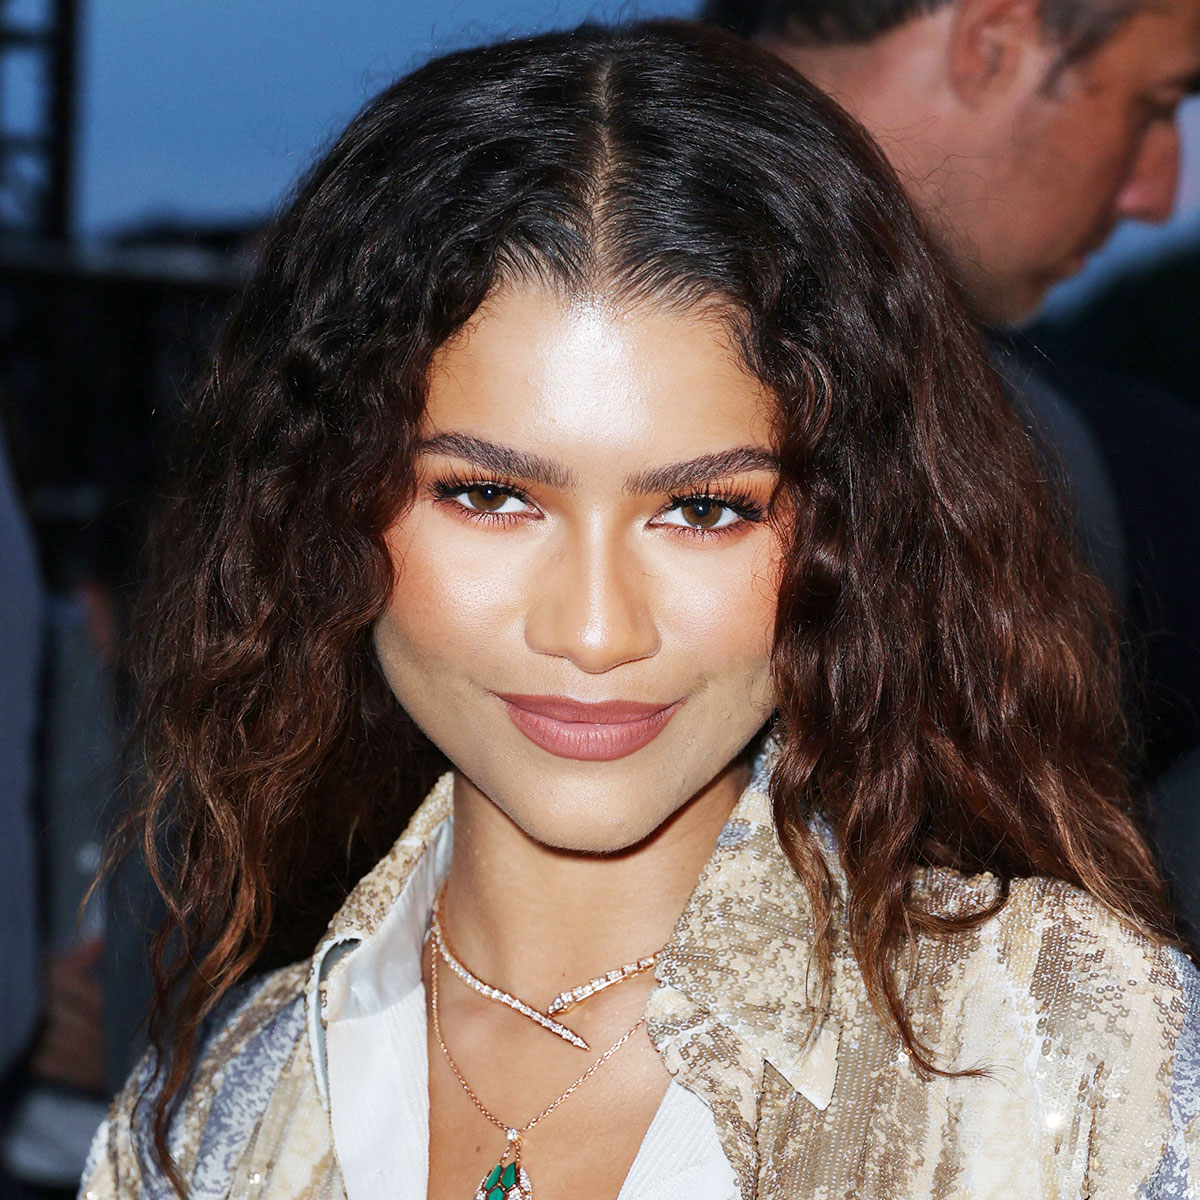 Zendaya Addresses Engagement Rumors After Posting Photo With Giant Ring